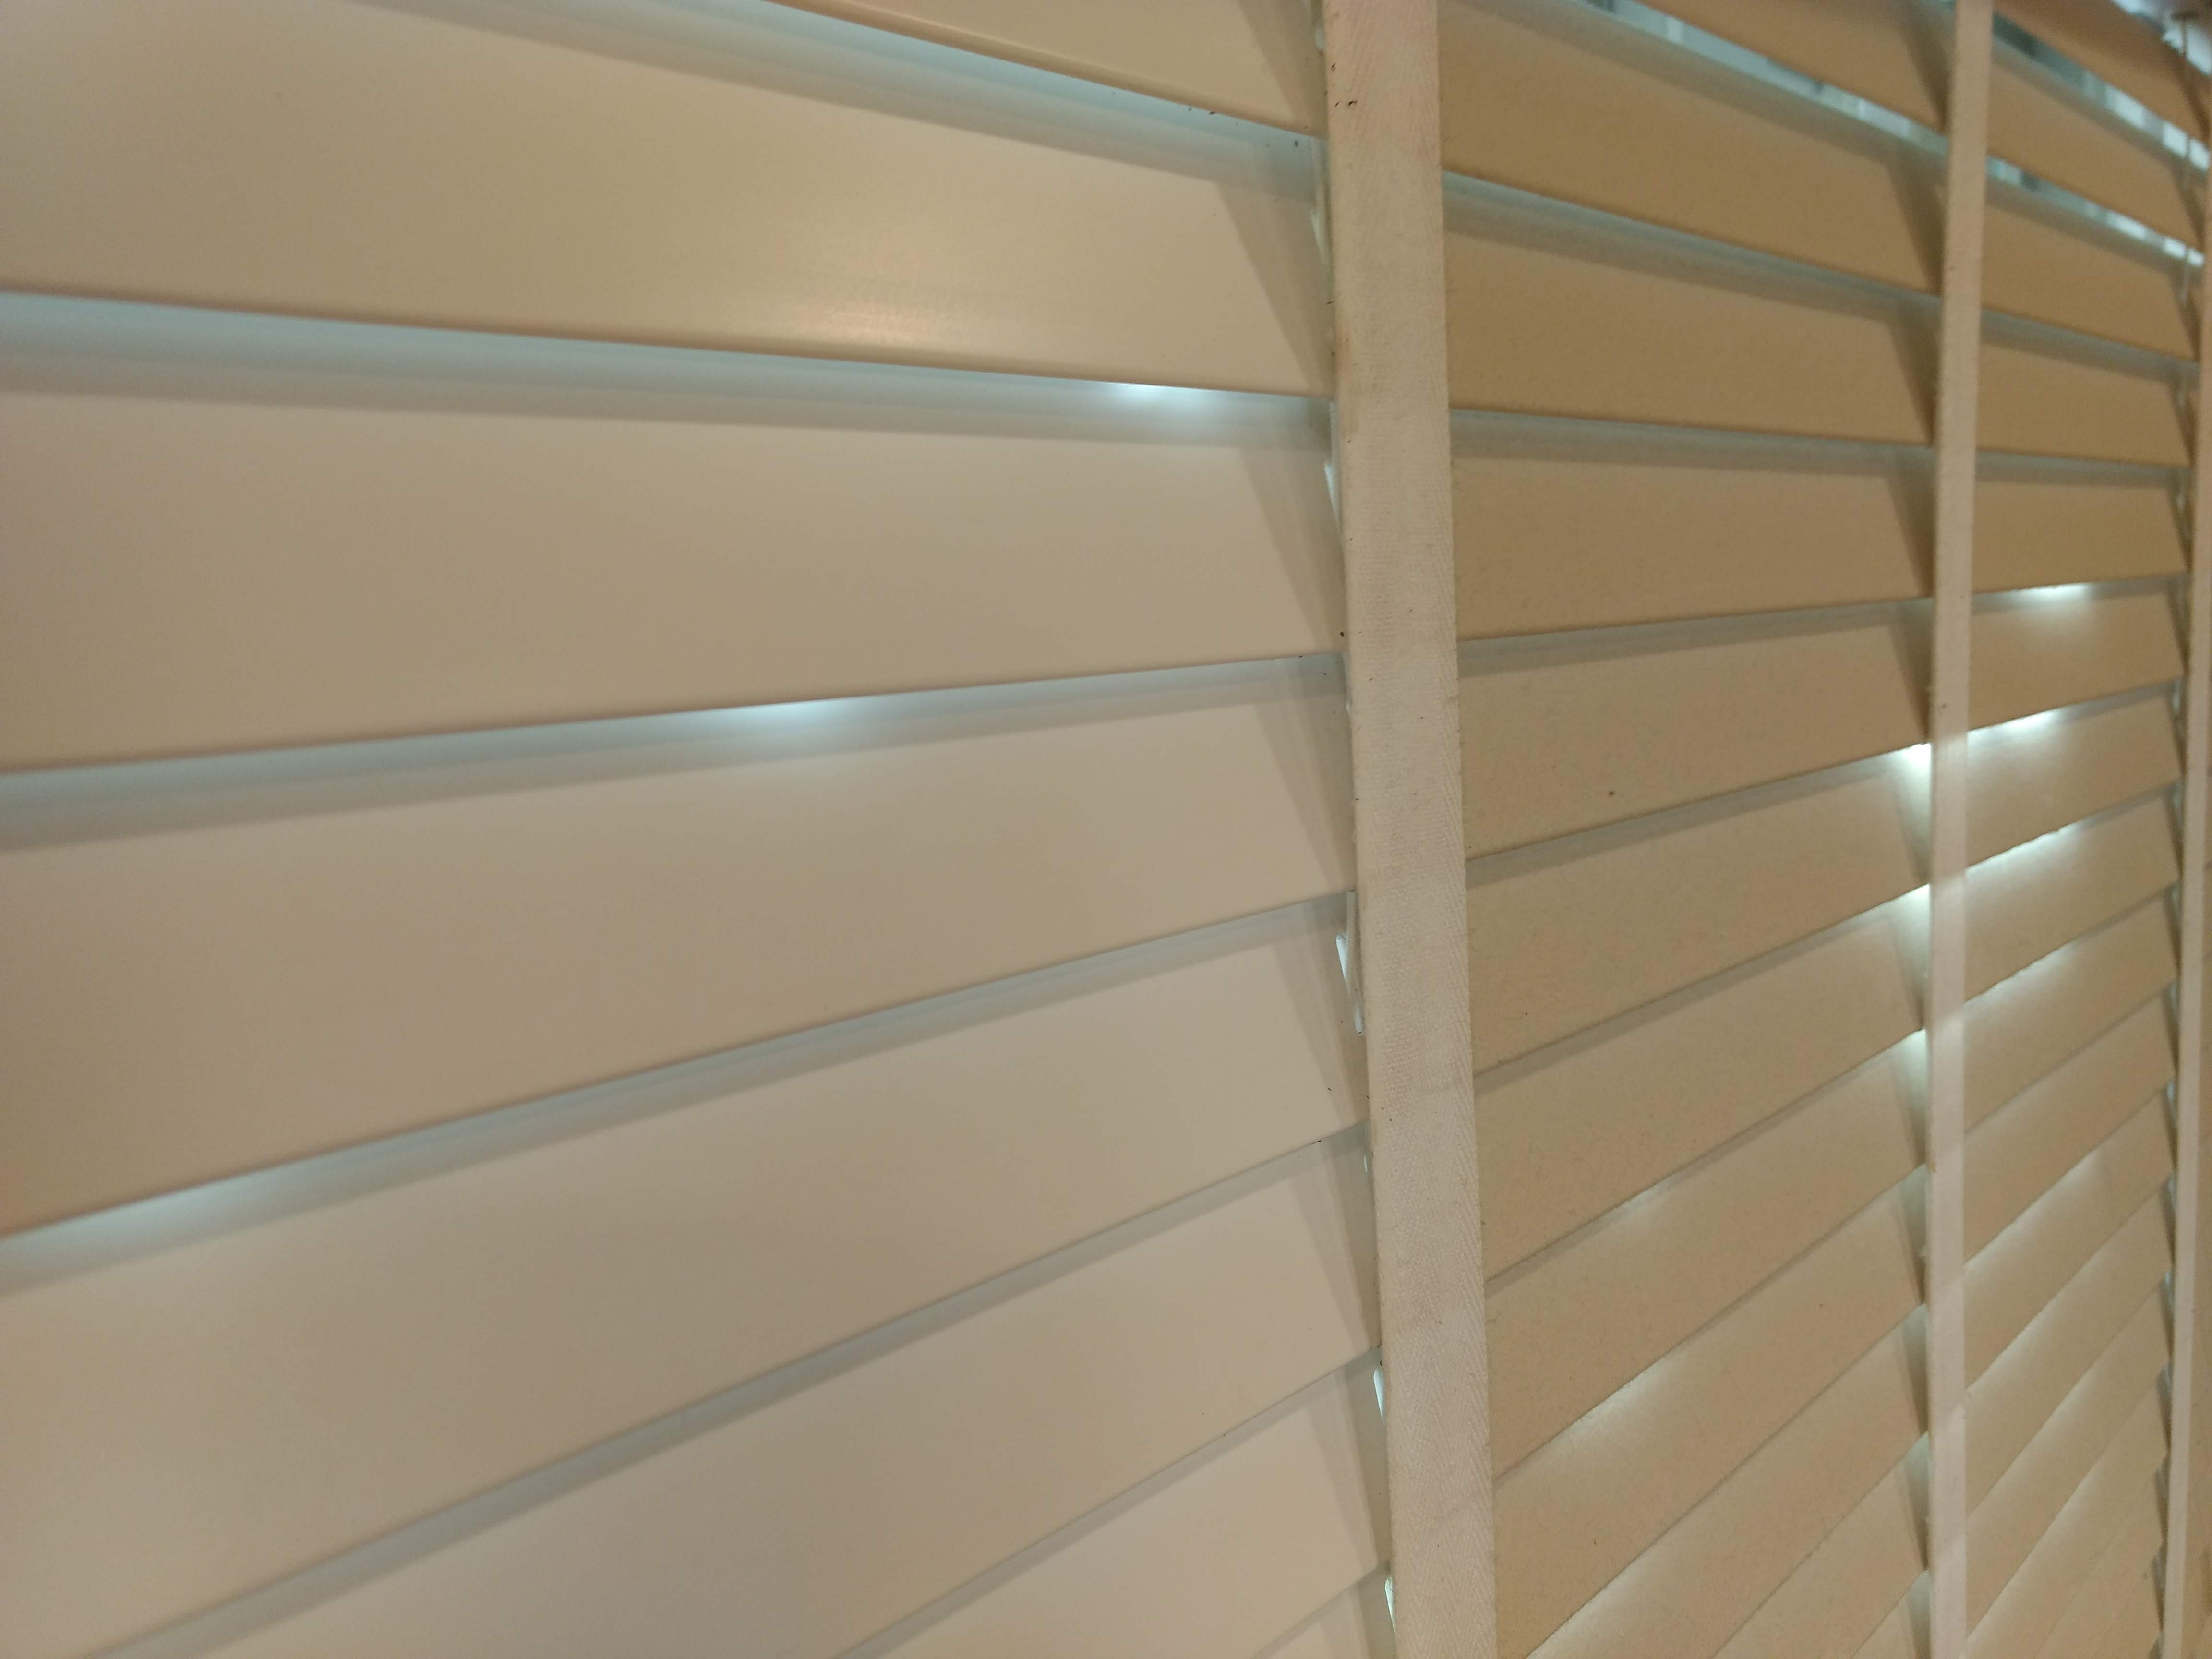 How to Clean Wooden Blinds